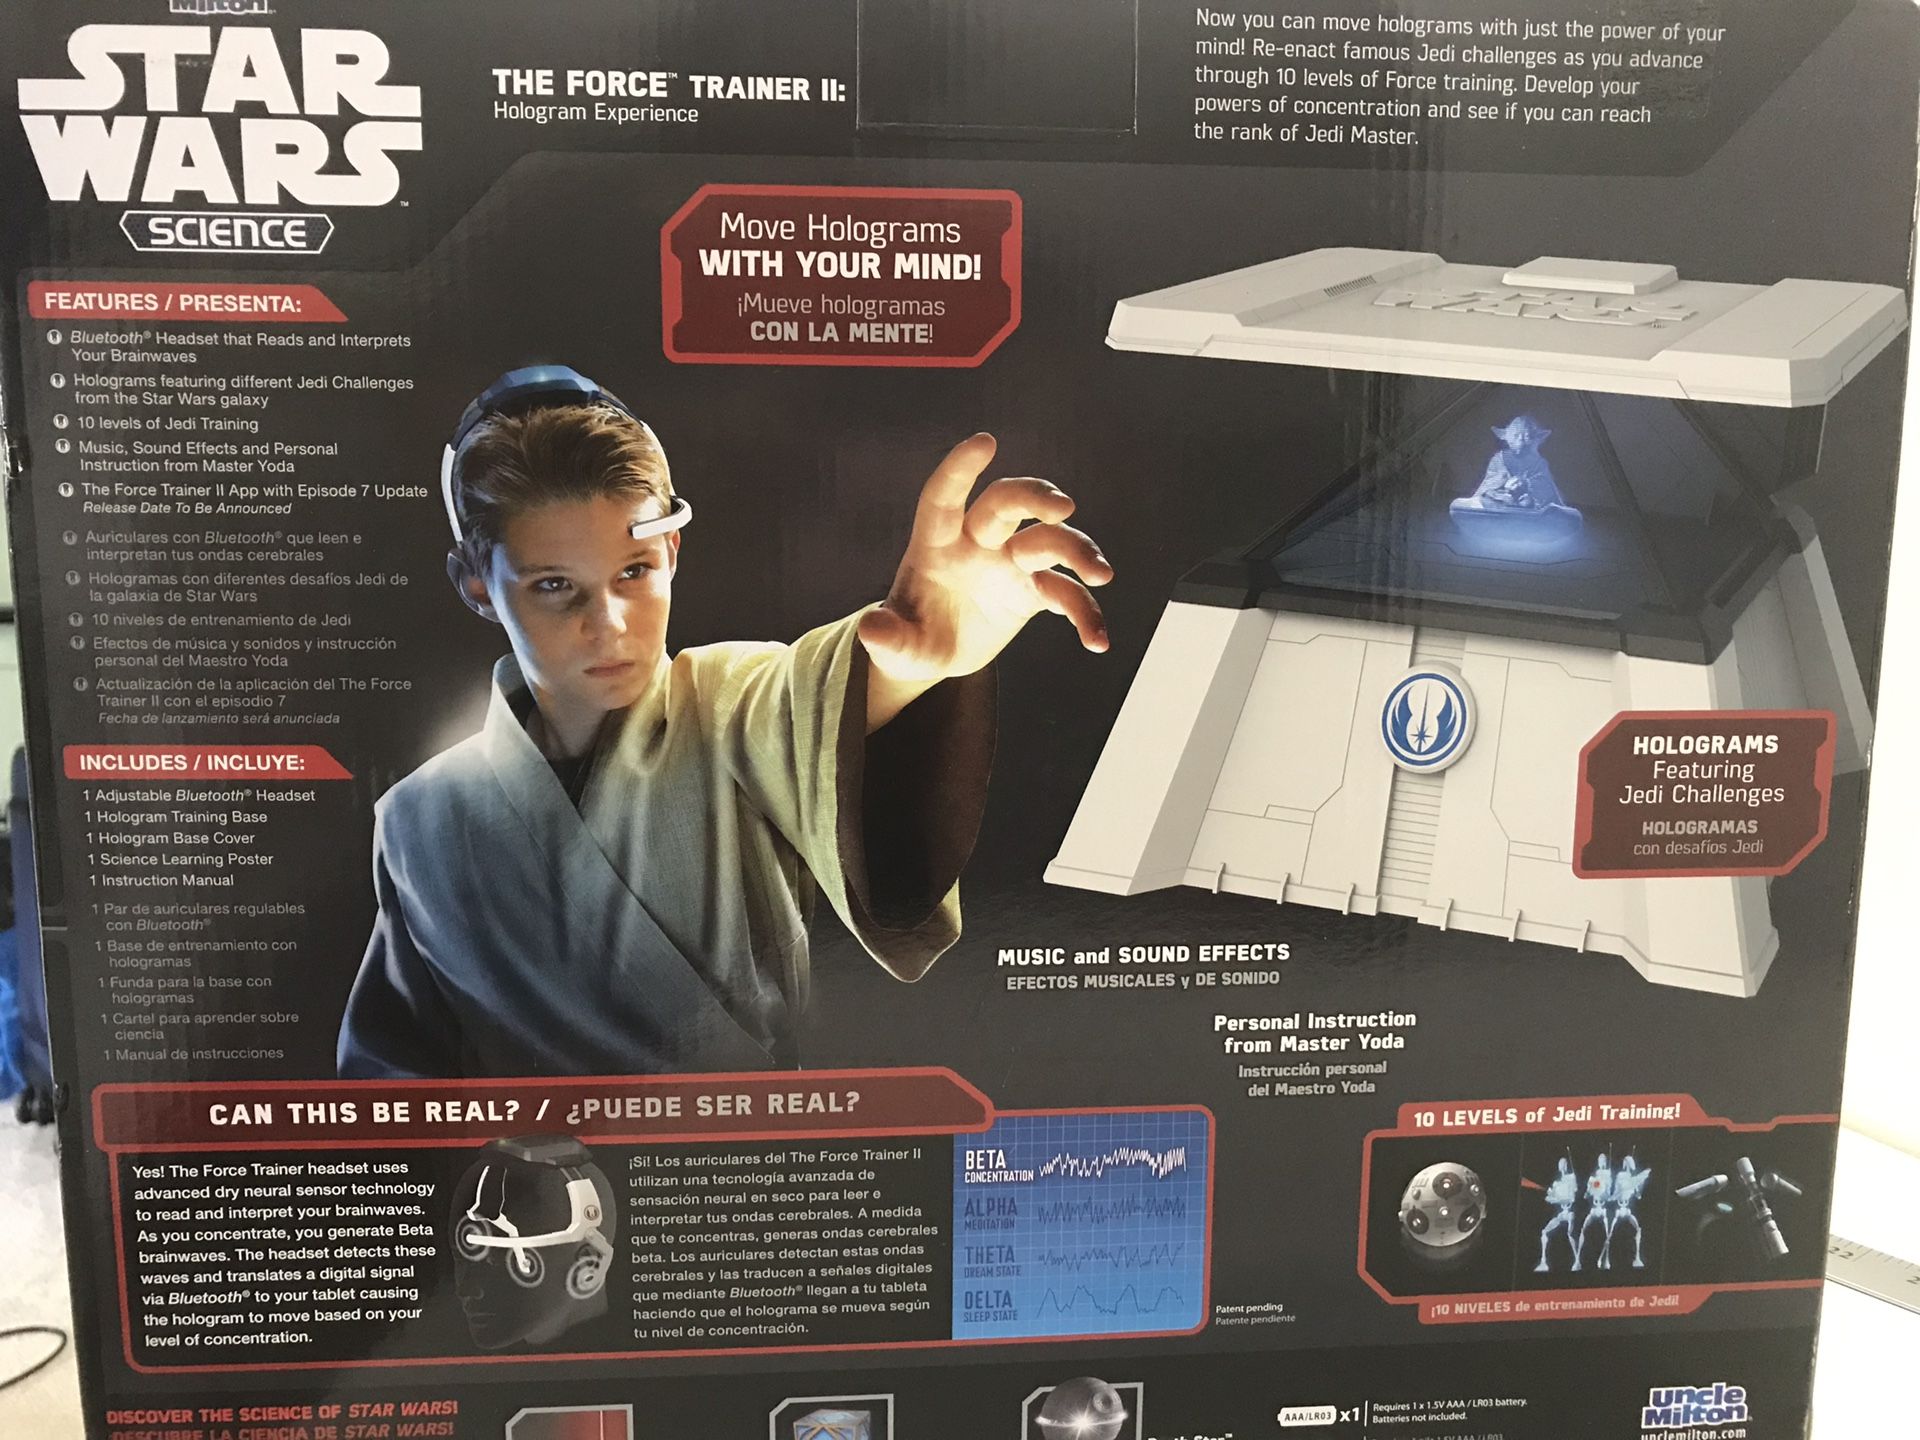 Star Wars - science hologram experience UNOPENED